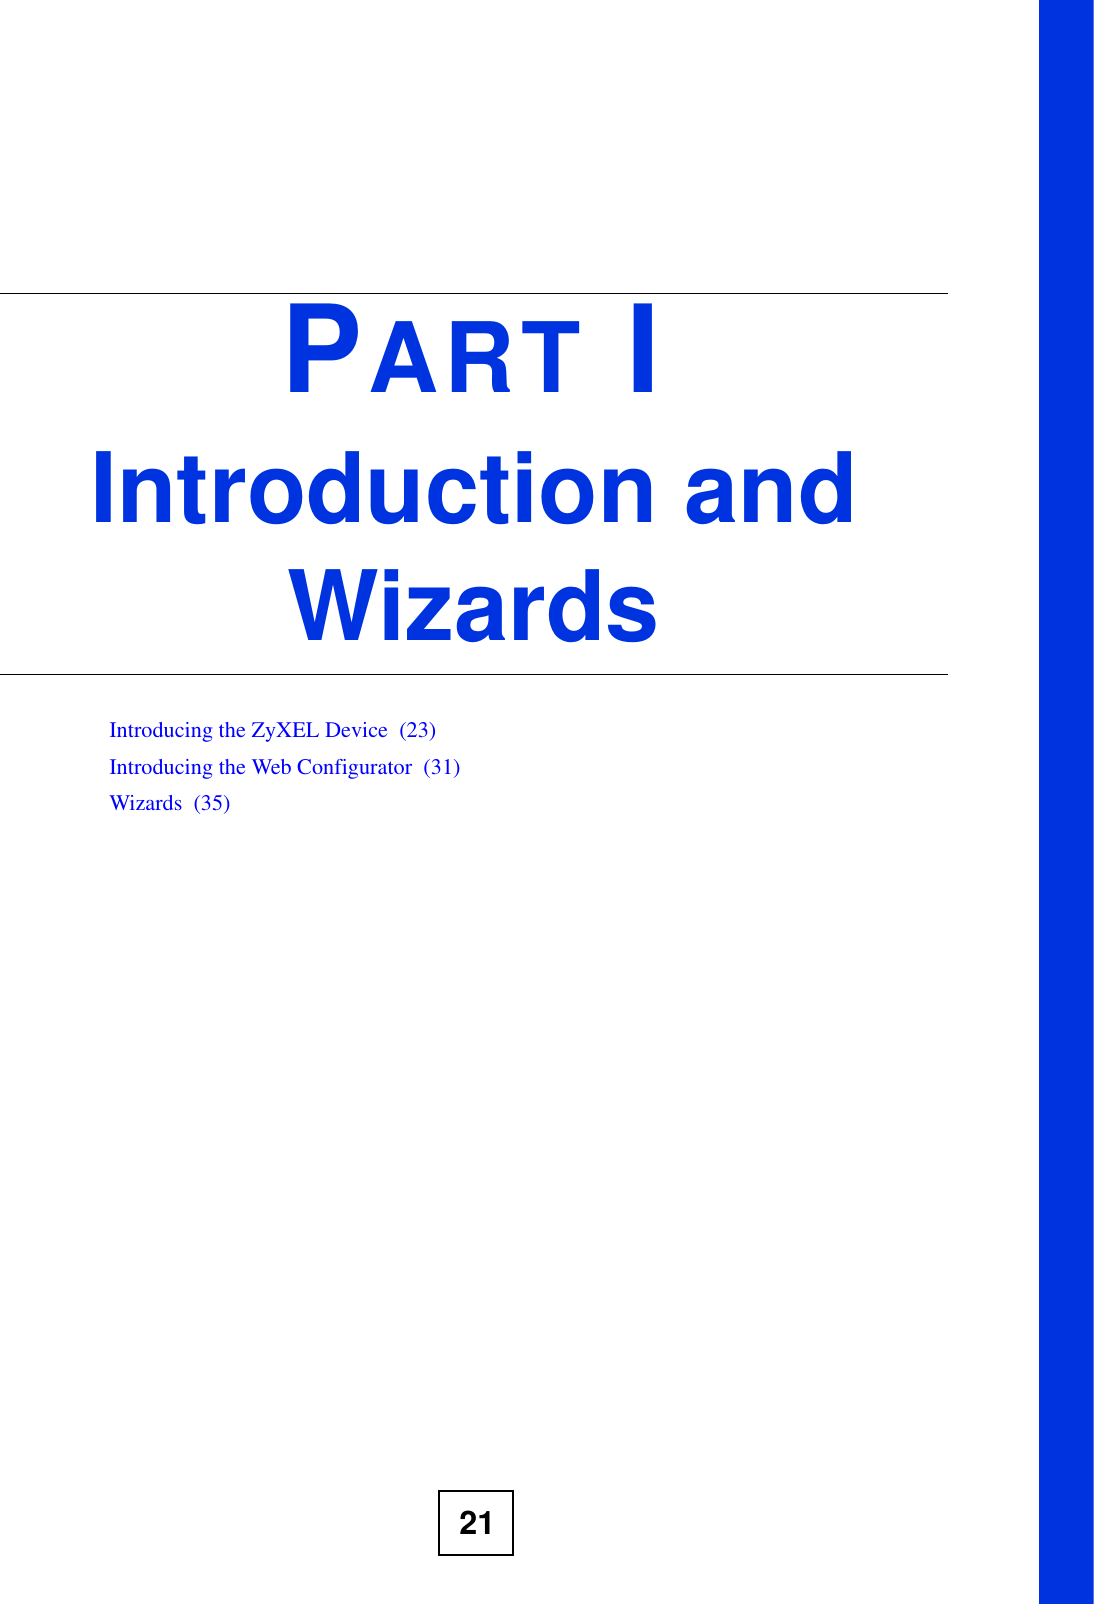 21PART IIntroduction and WizardsIntroducing the ZyXEL Device  (23)Introducing the Web Configurator  (31)Wizards  (35)